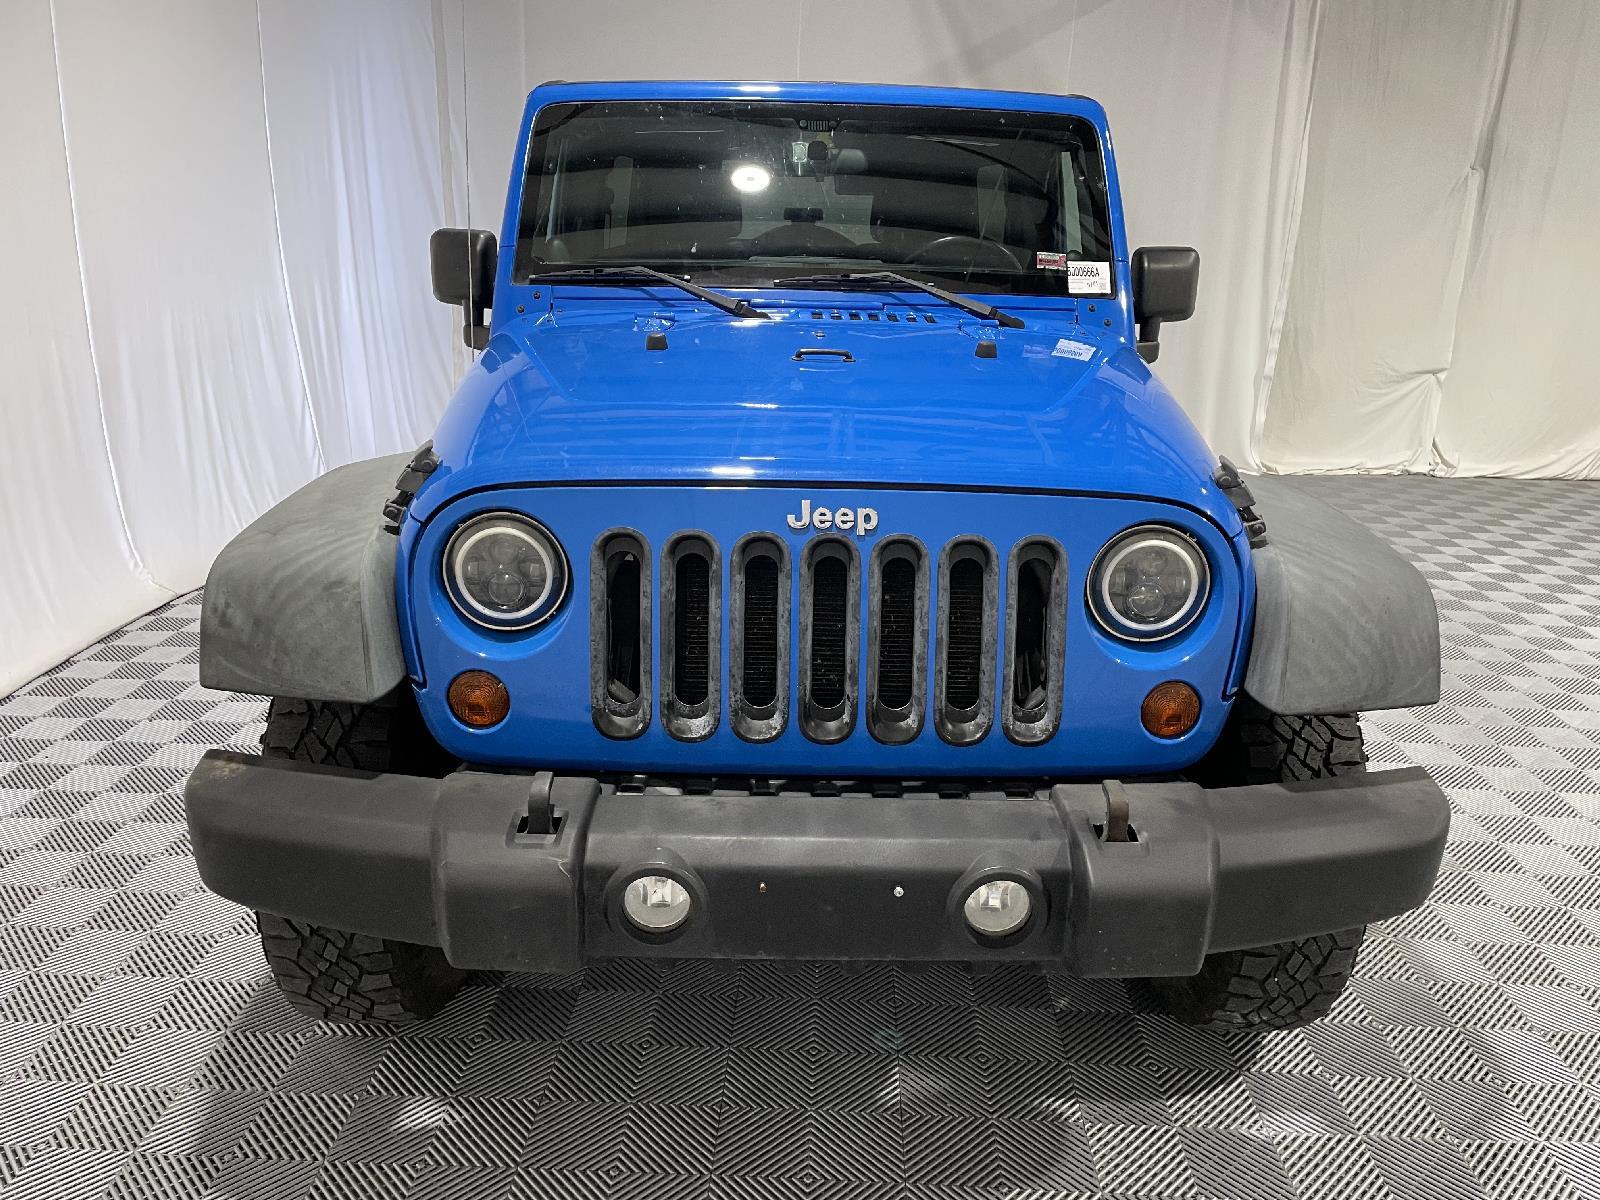 Used 2011 Jeep Wrangler Unlimited Sport 4 door for sale in St Joseph MO